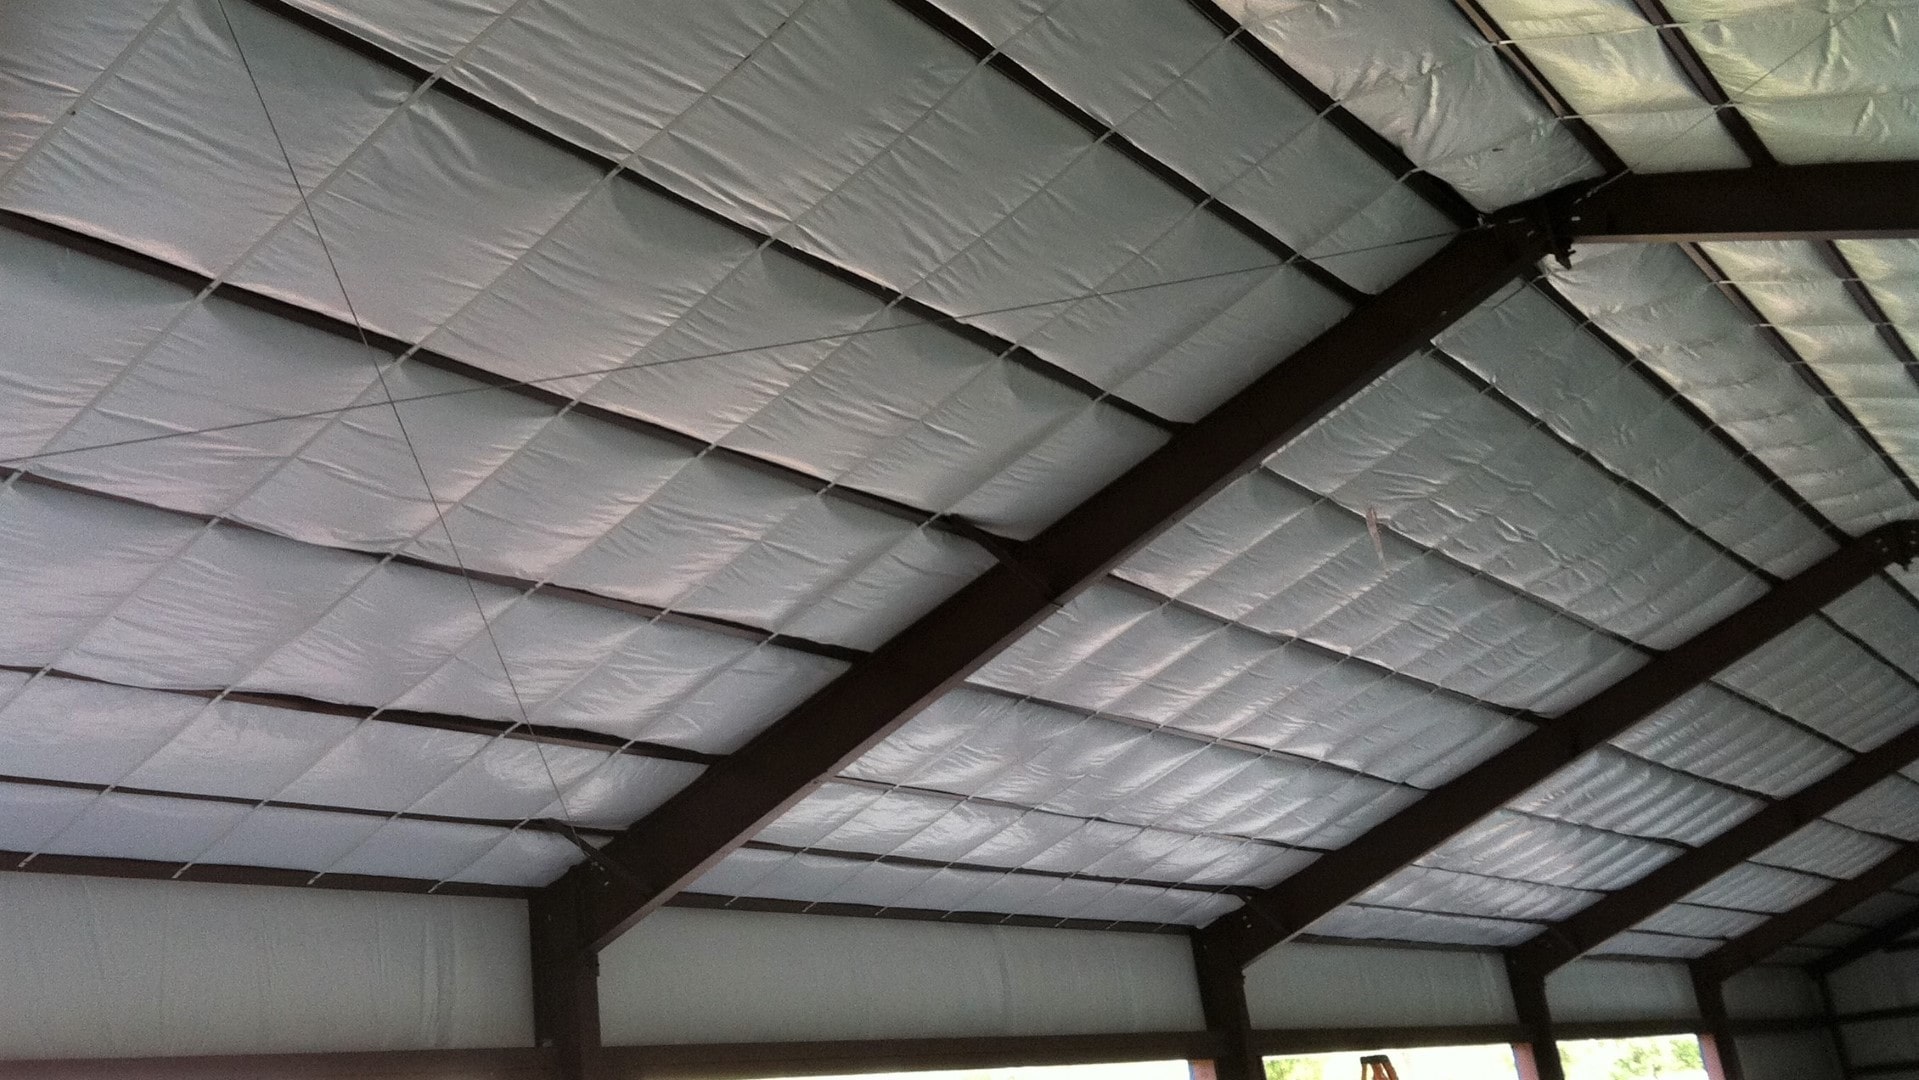 FAQ's: How Do You Insulate an Existing Steel Building?